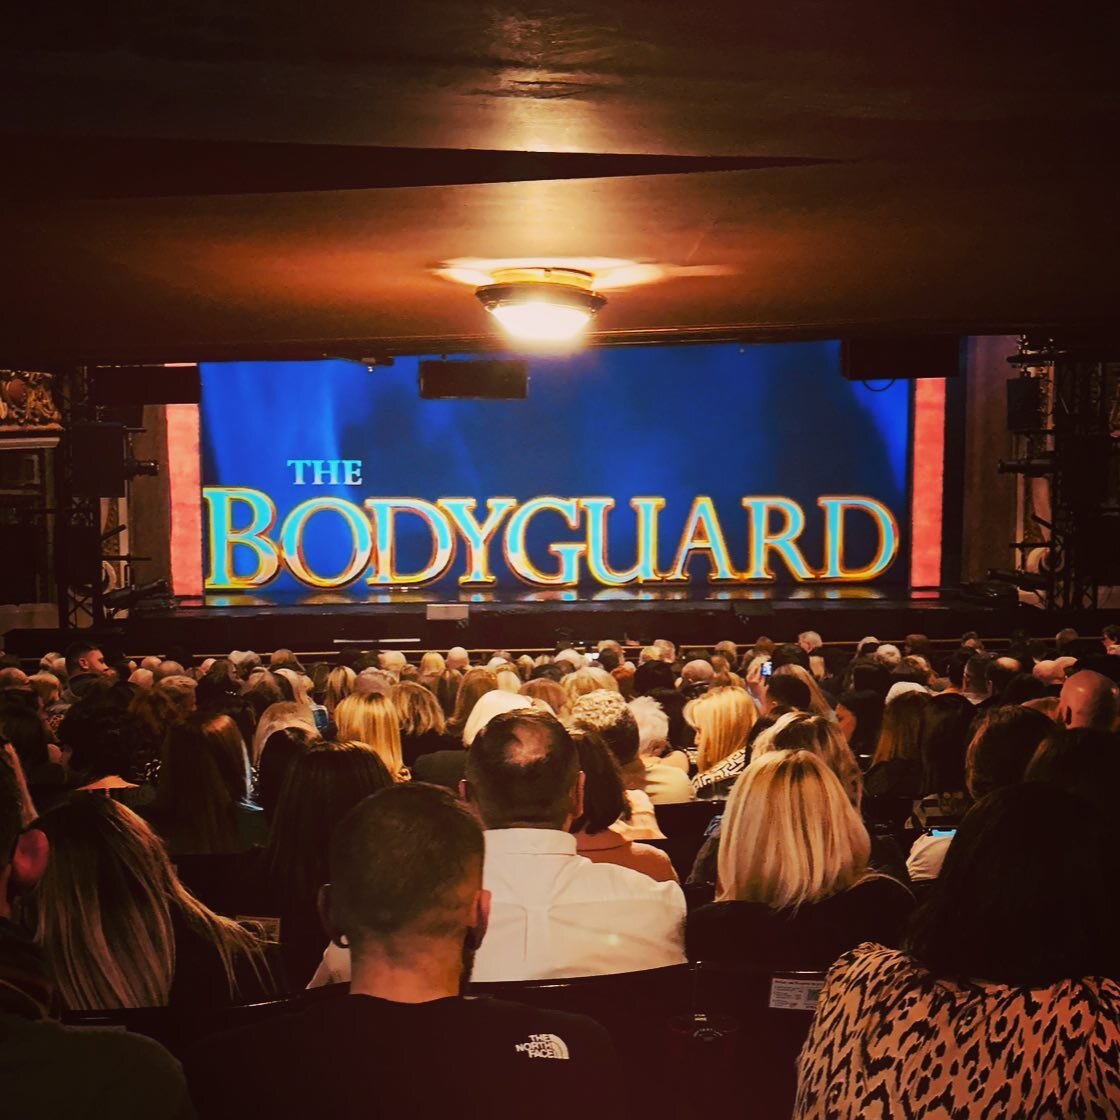 After 11 years&hellip; and many, many, many different casts around the world, another UK tour of @thebodyguarduk commences!